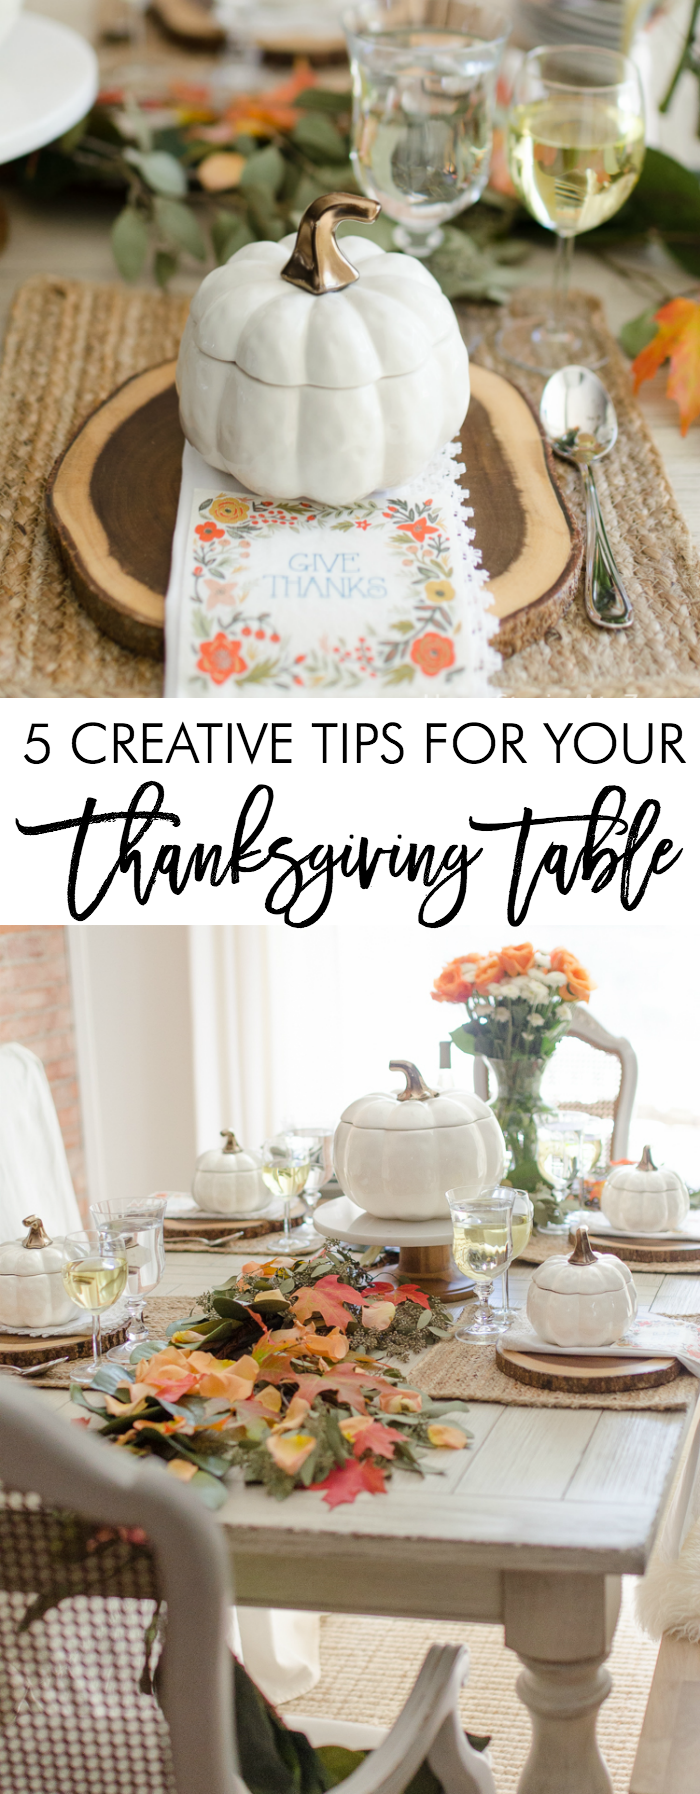 thanksgiving table tips